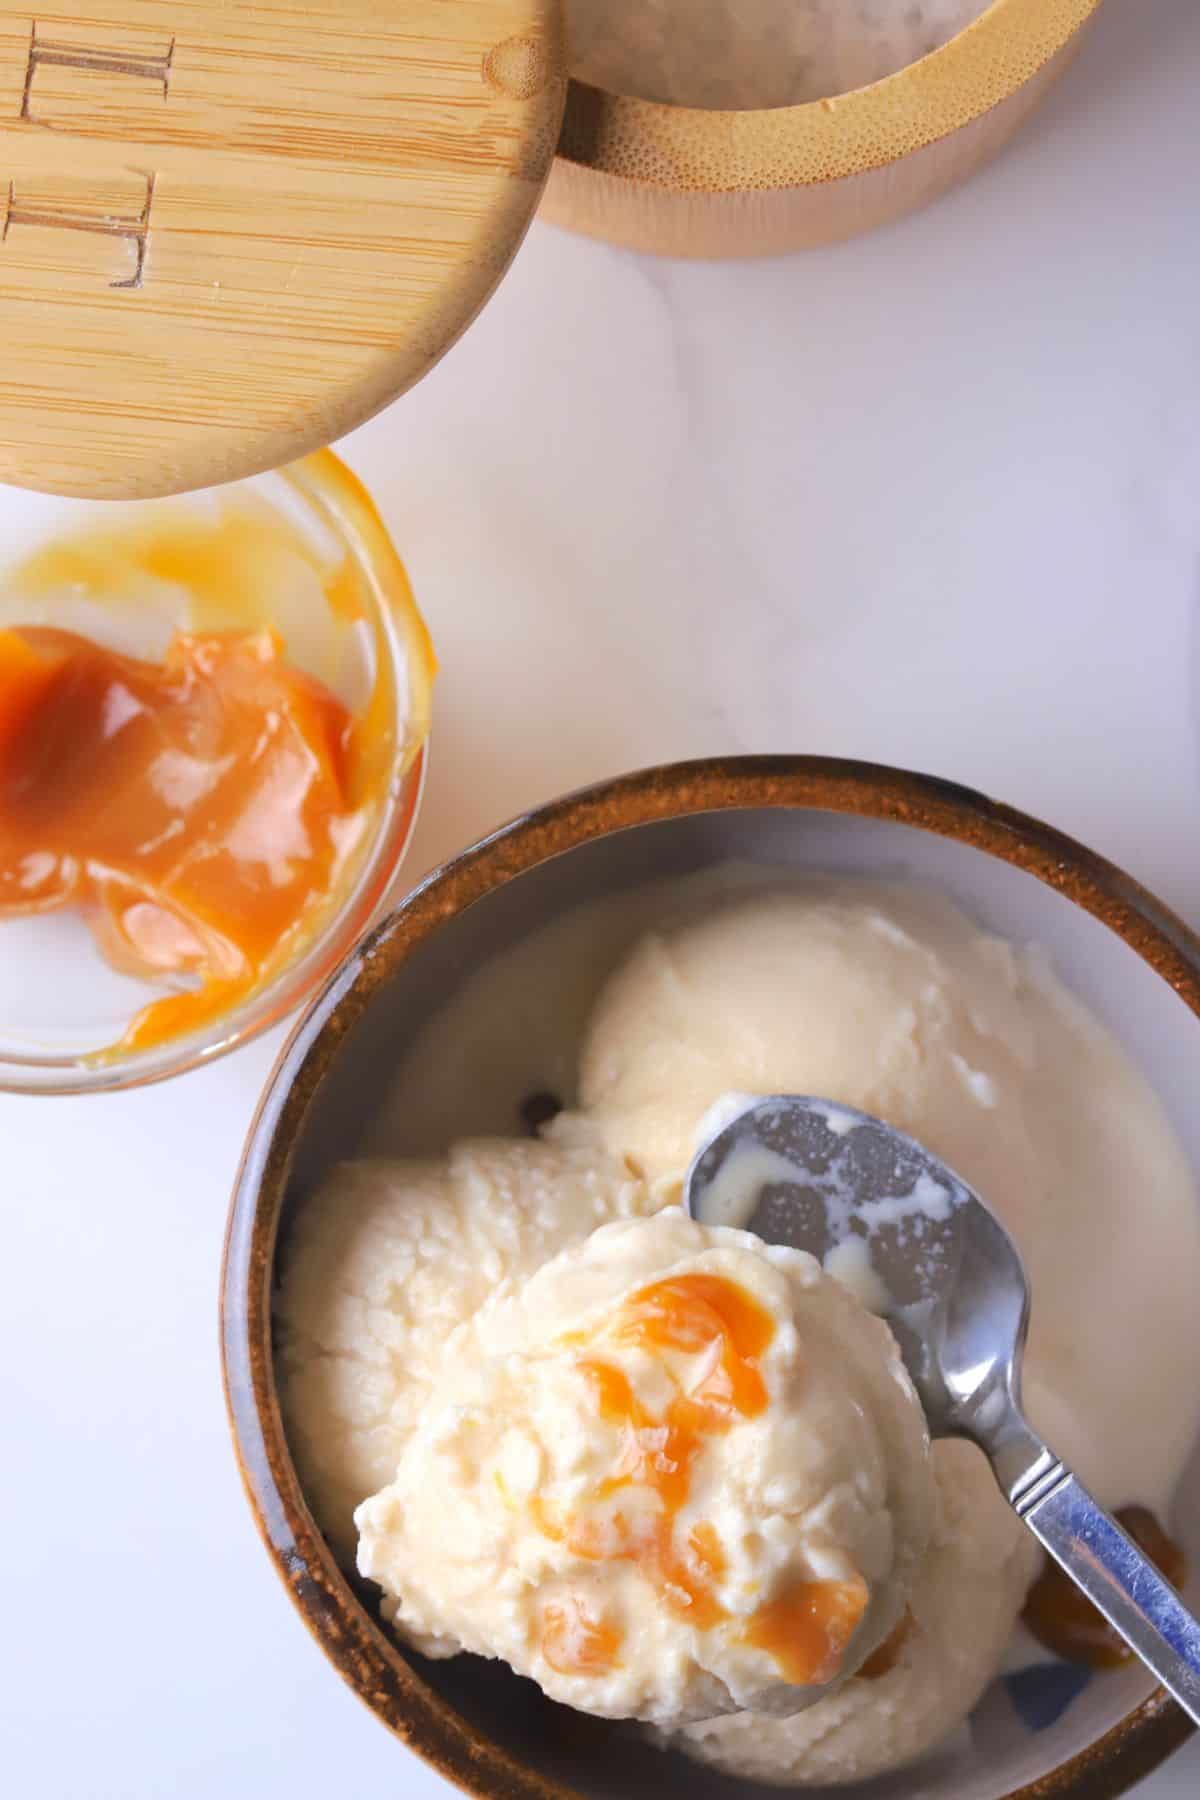 Sugar free salted caramel ice cream in a bowl next to a small bowl of caramel and a salt container.